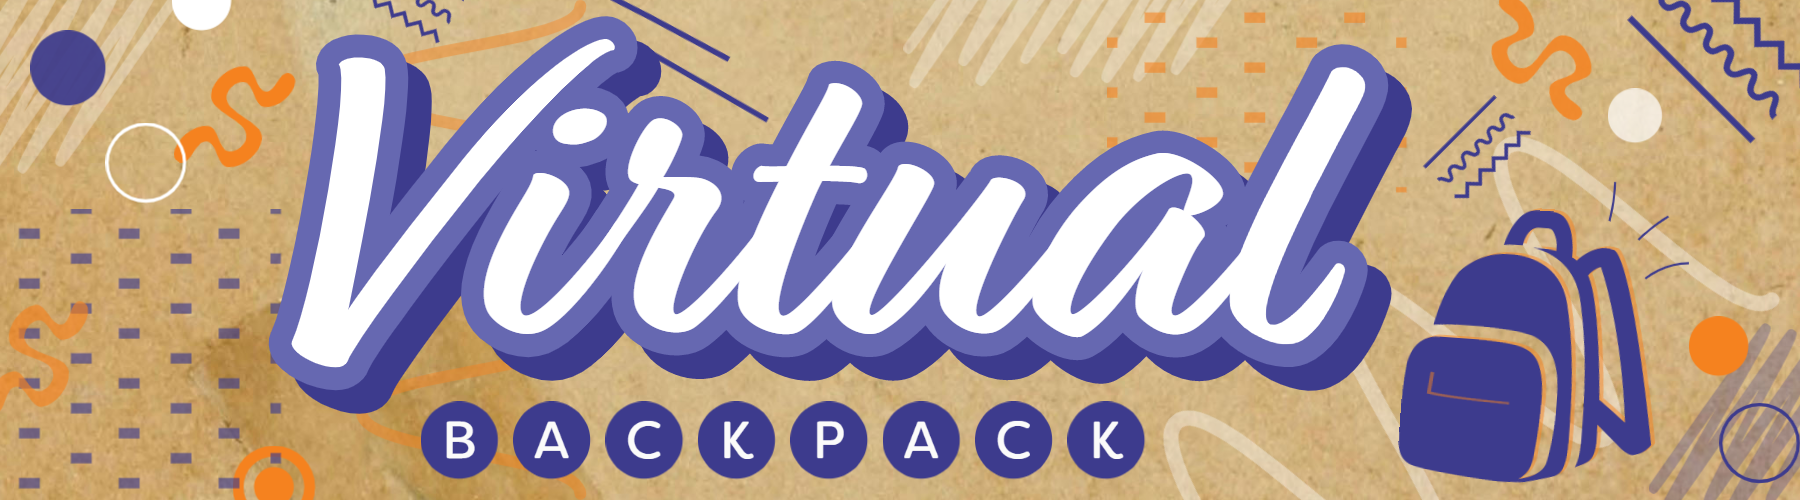 Virtual Backpack logo. Paper bag background, in text "Virtual Backpack". Background has different squiggles in blue, orange and white. There is a blue backpack in the bottom right hand corner. 